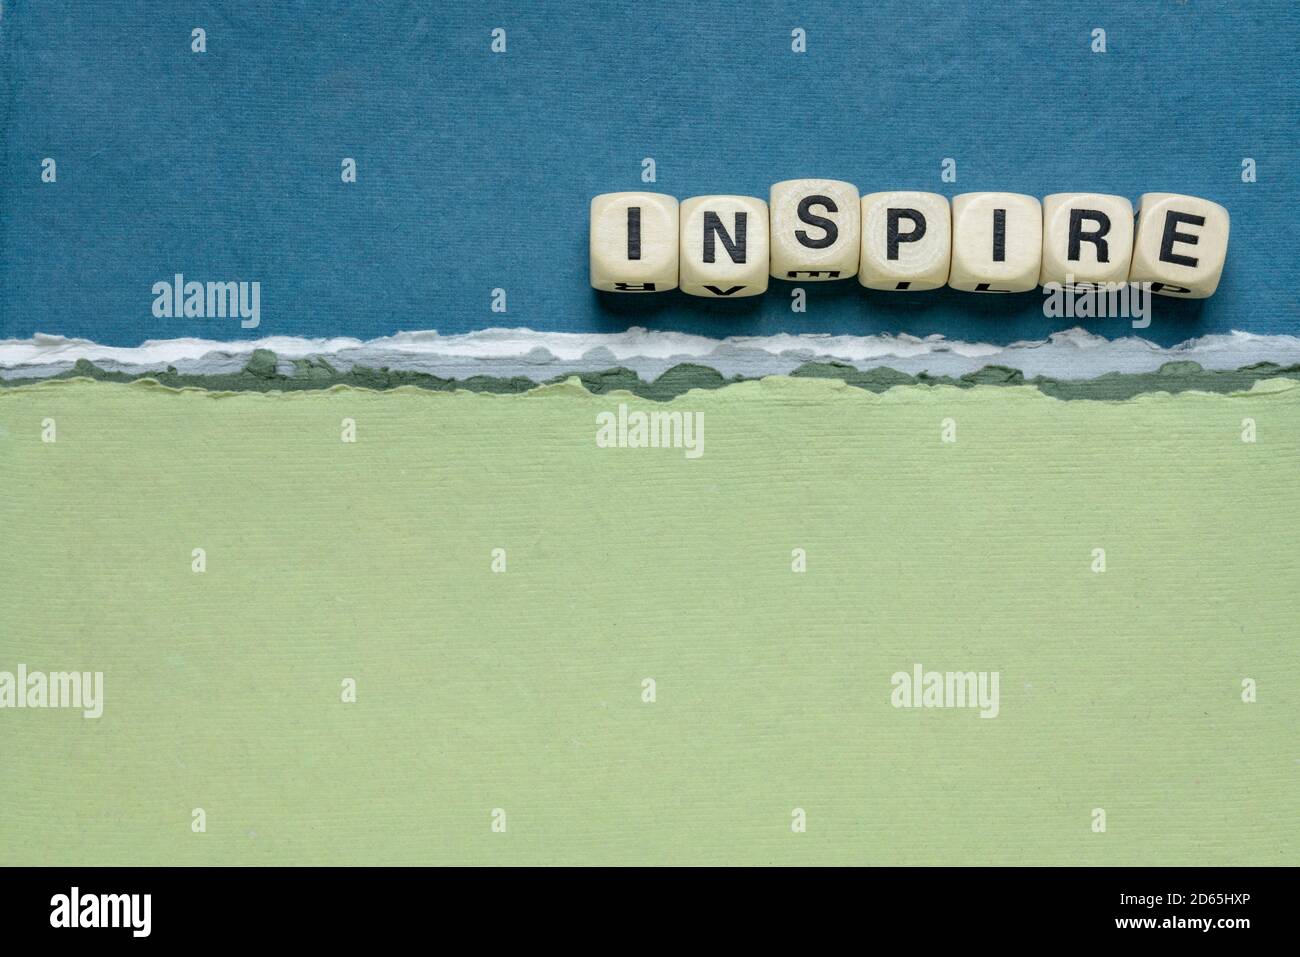 inspire word abstract in wooden letter cubes against handmade paper abstract in blue and green tones, inspiration, leadership and role model concept Stock Photo